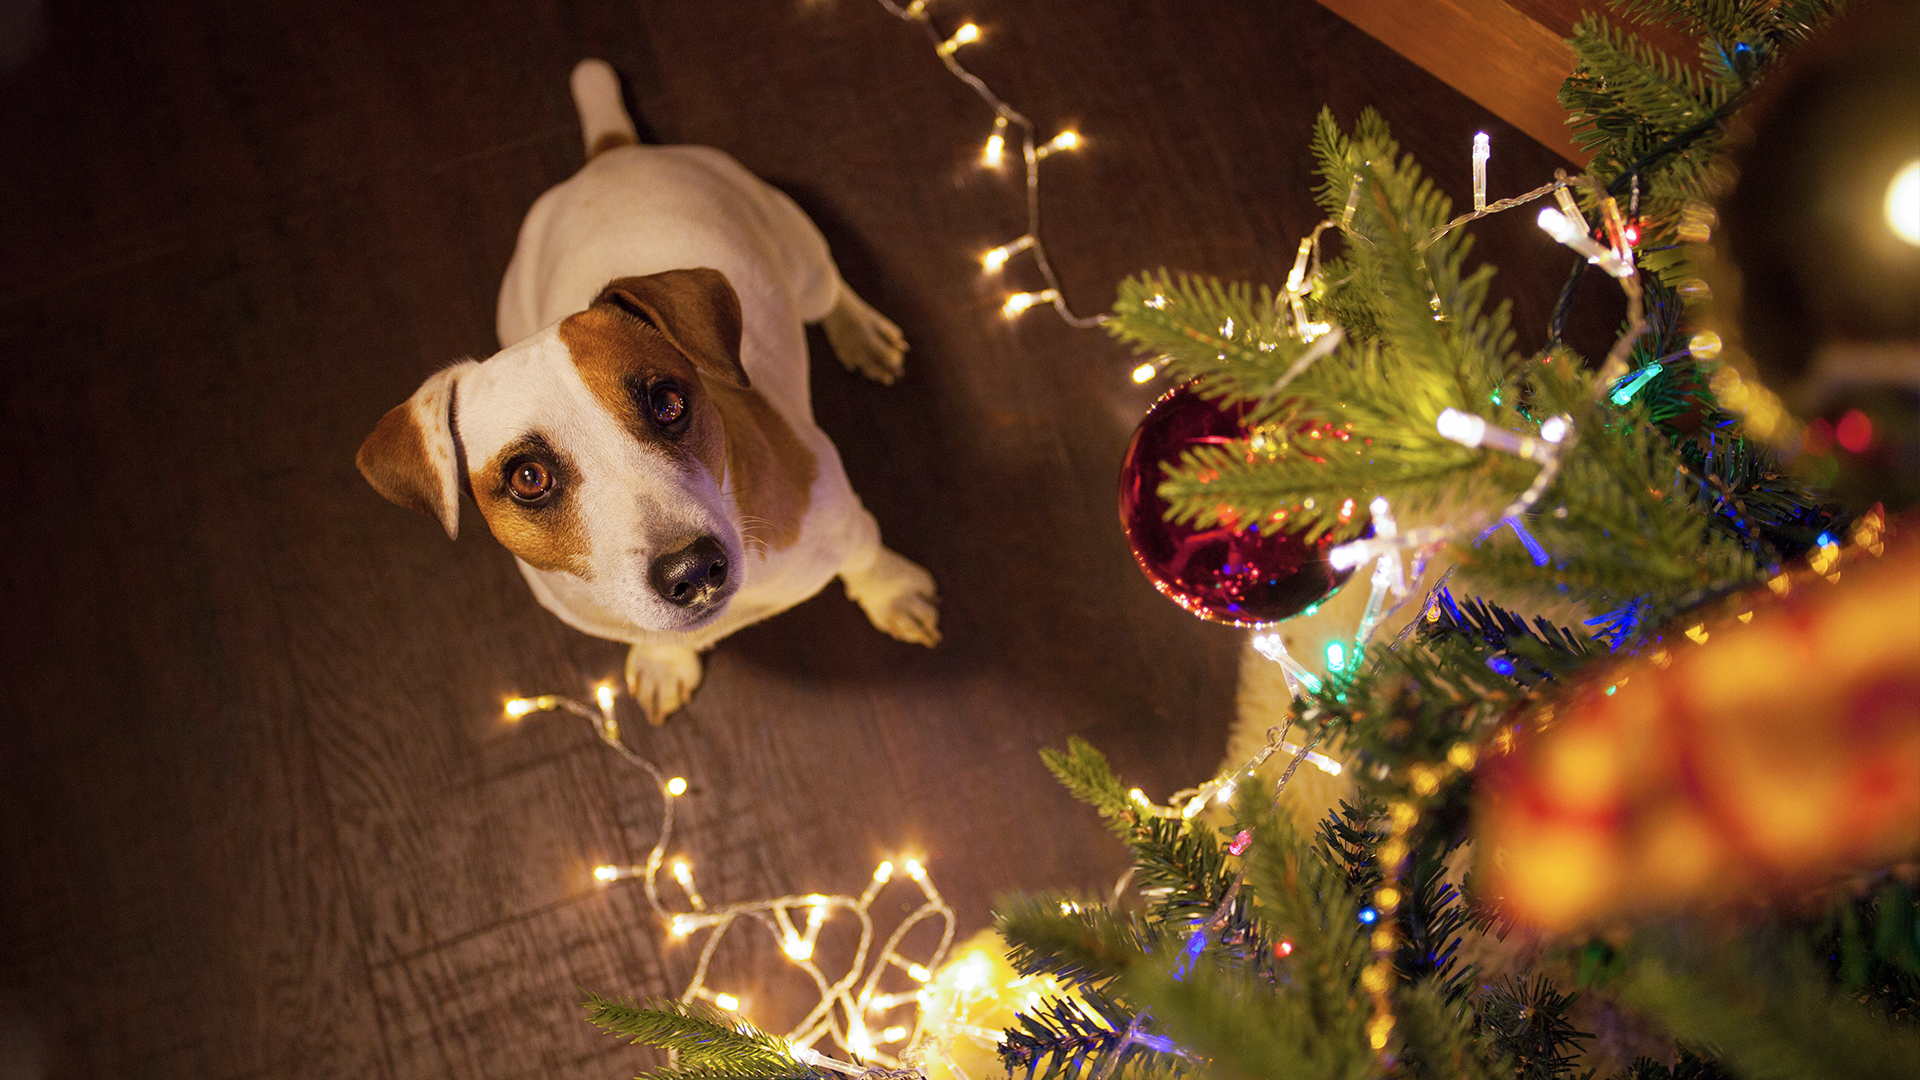 Things at Christmas your pet should avoid